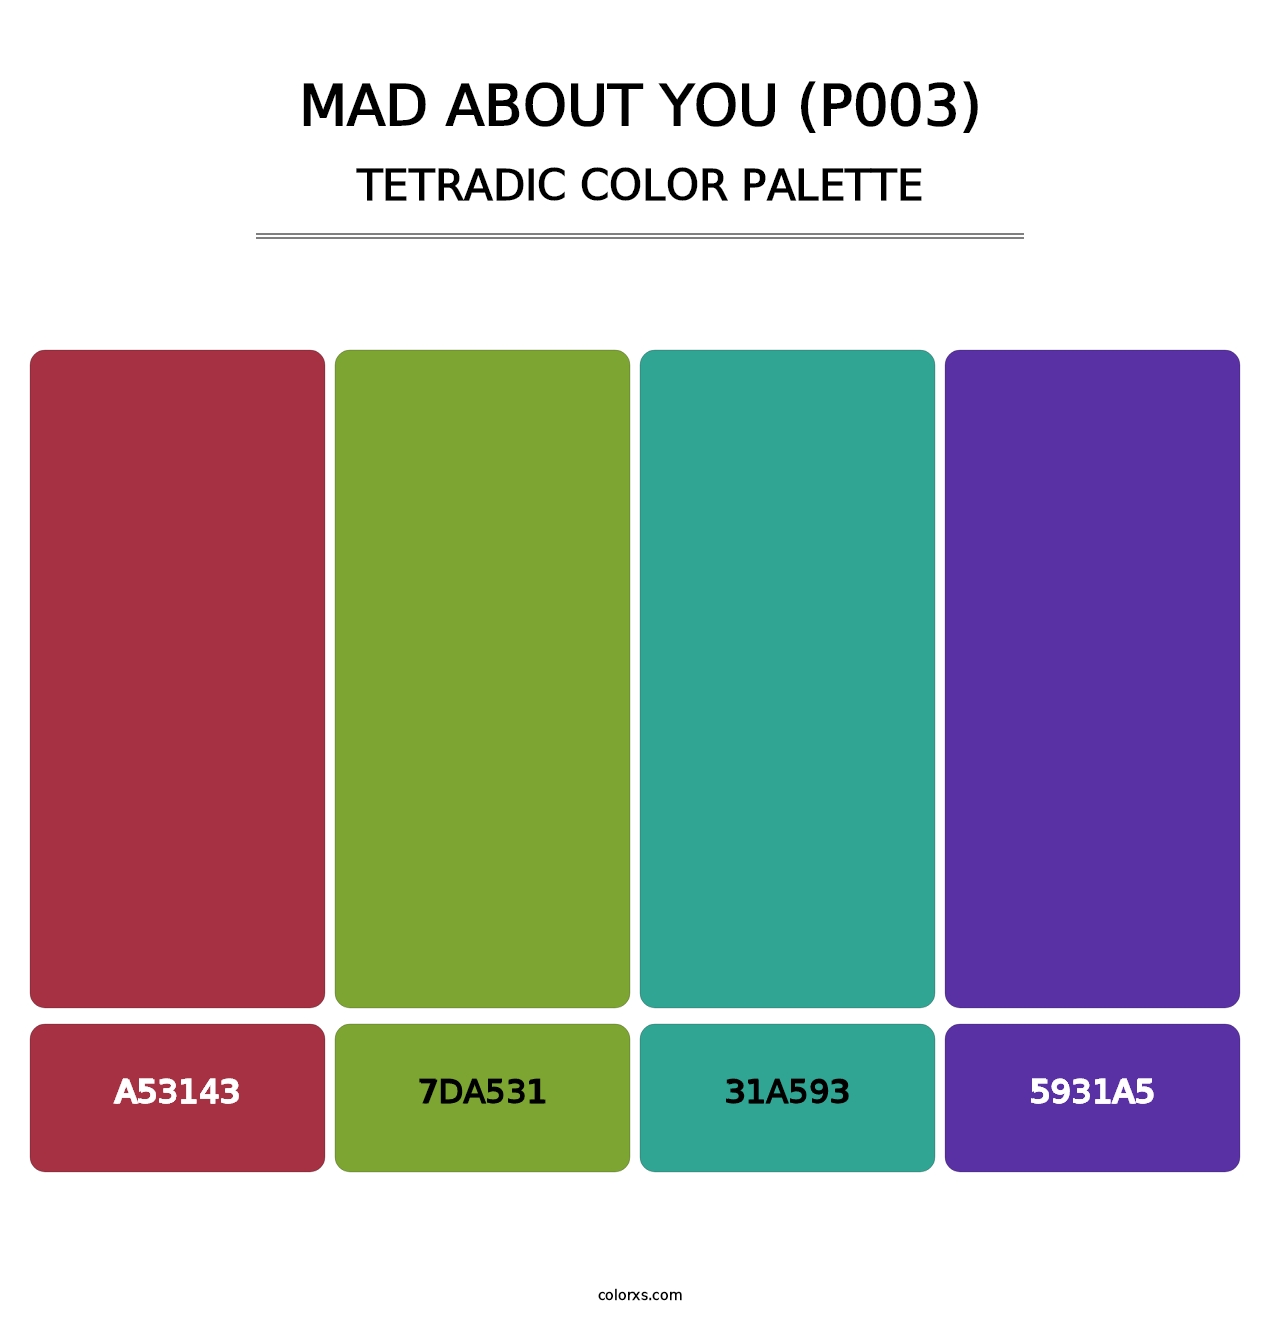 Mad About You (P003) - Tetradic Color Palette